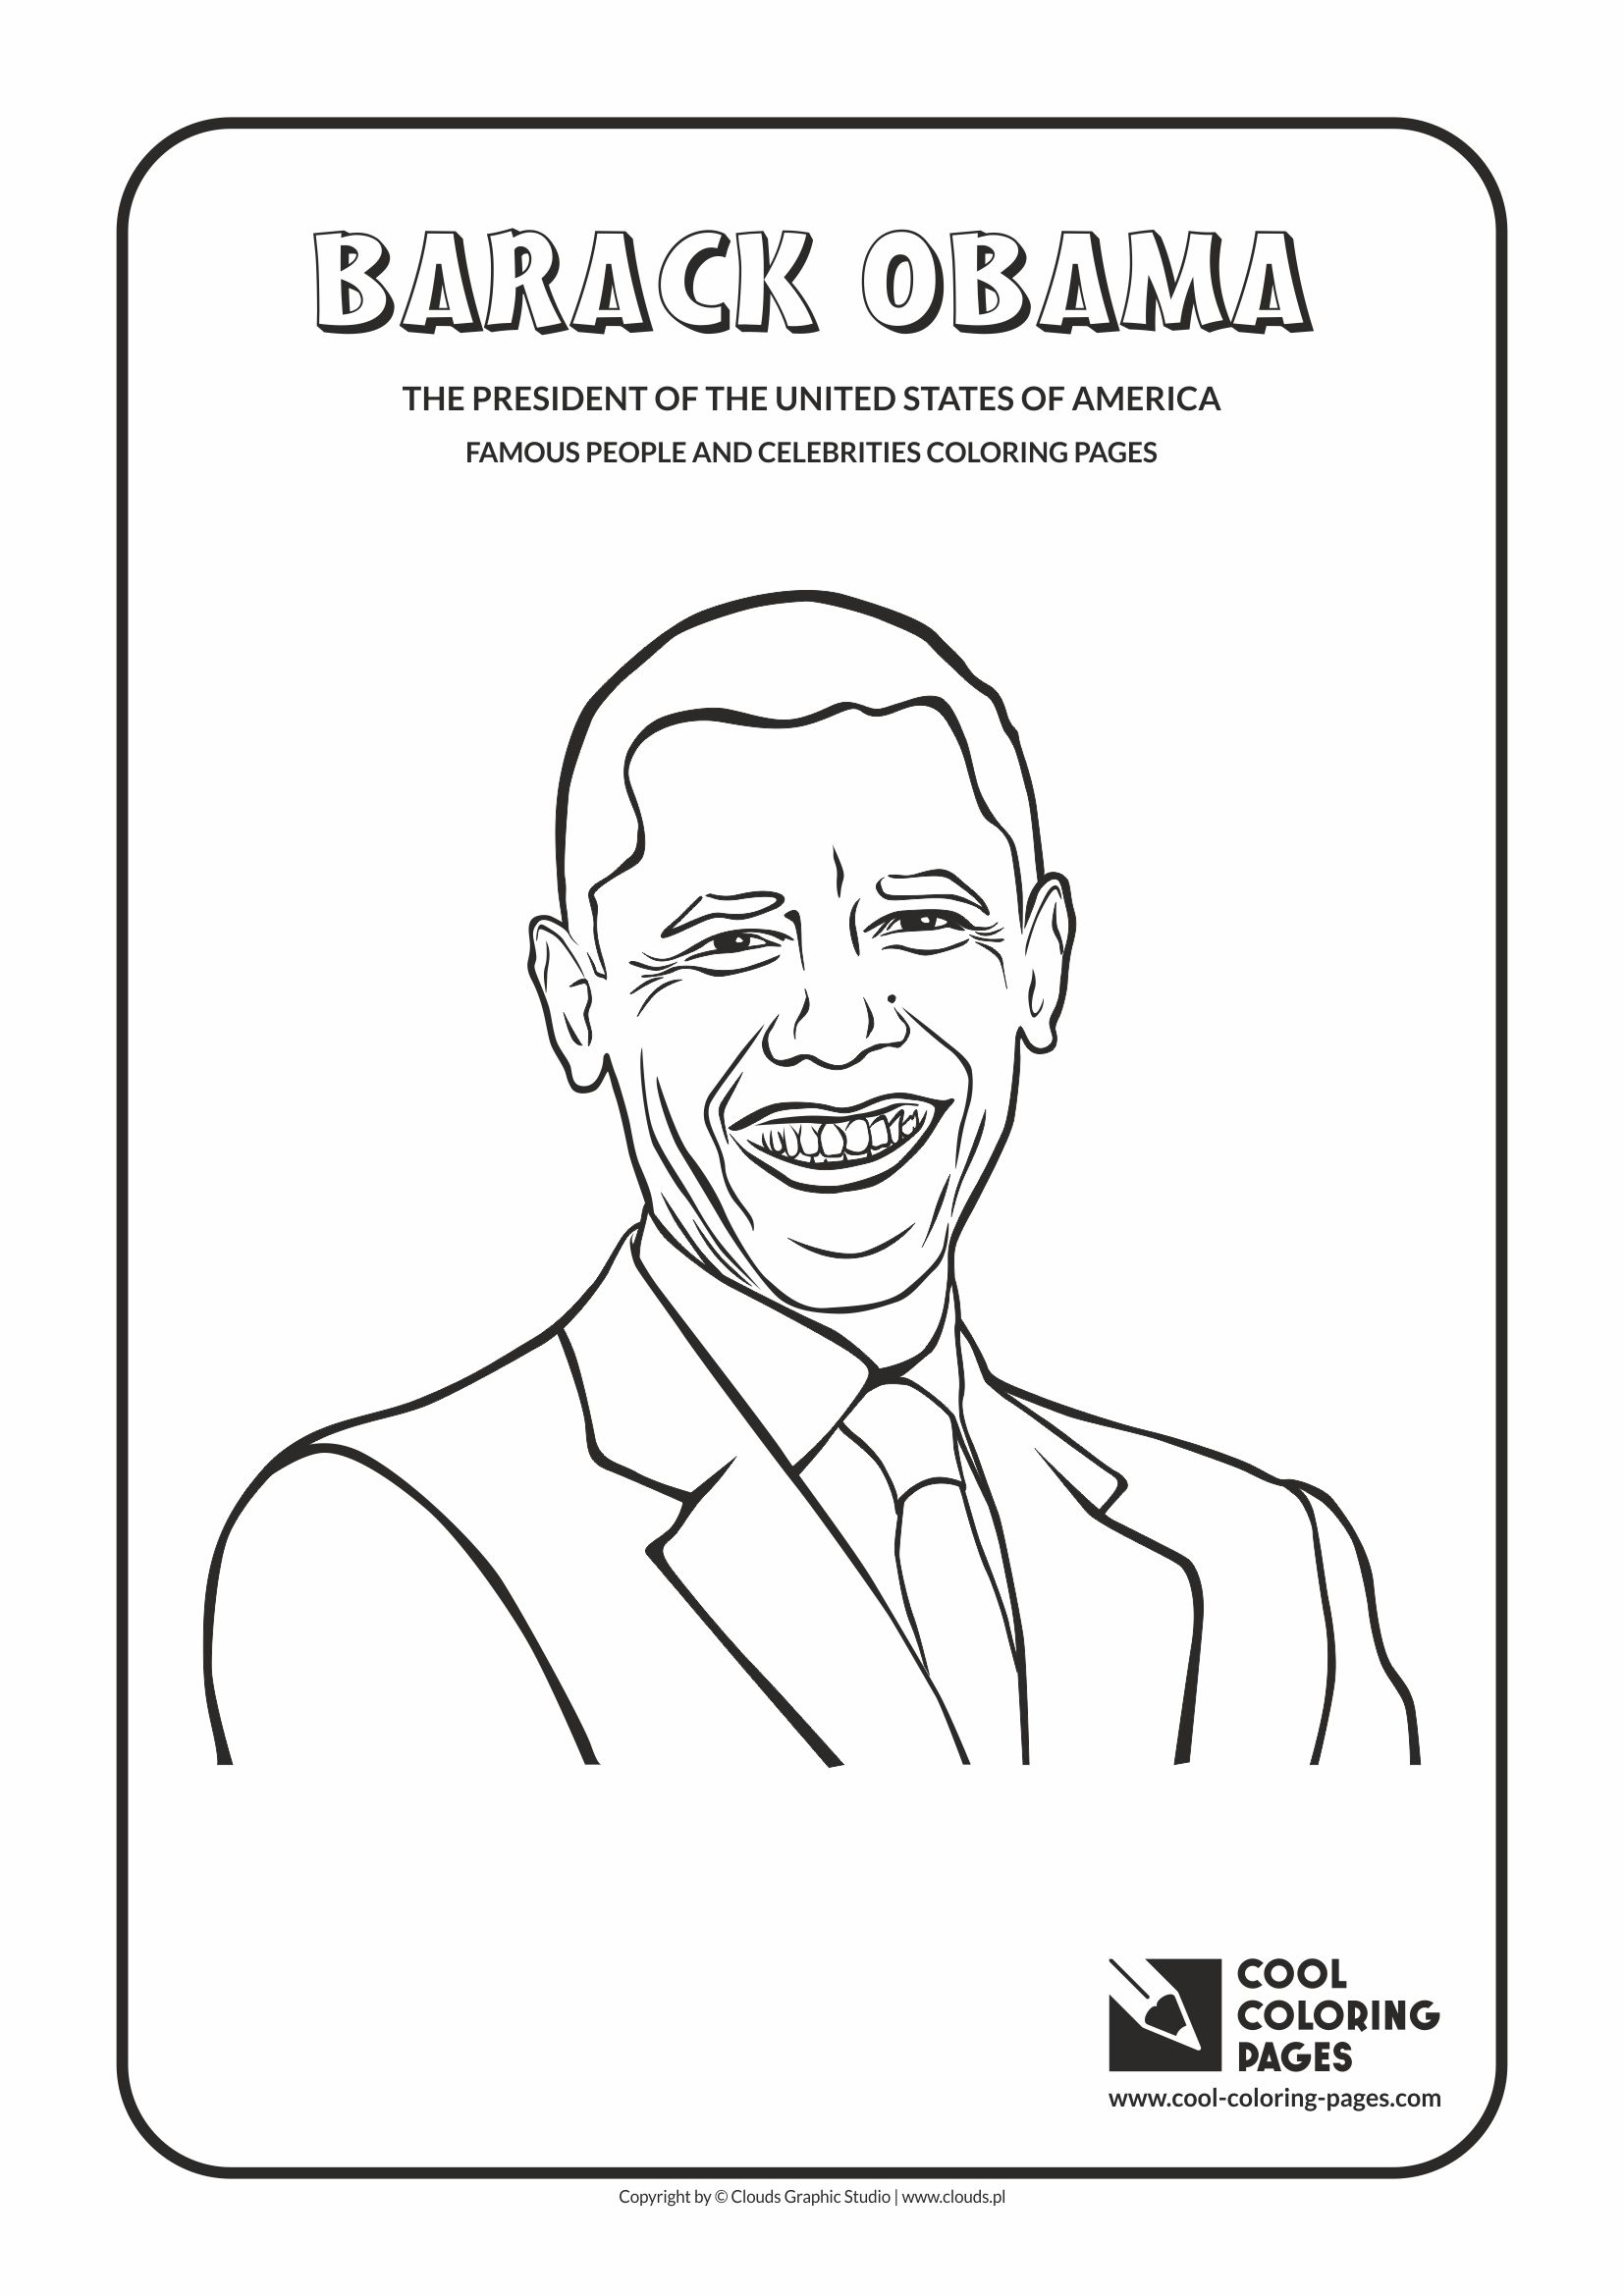 Cool Coloring Pages - Others / Barack Obama / Coloring page with Barack Obama